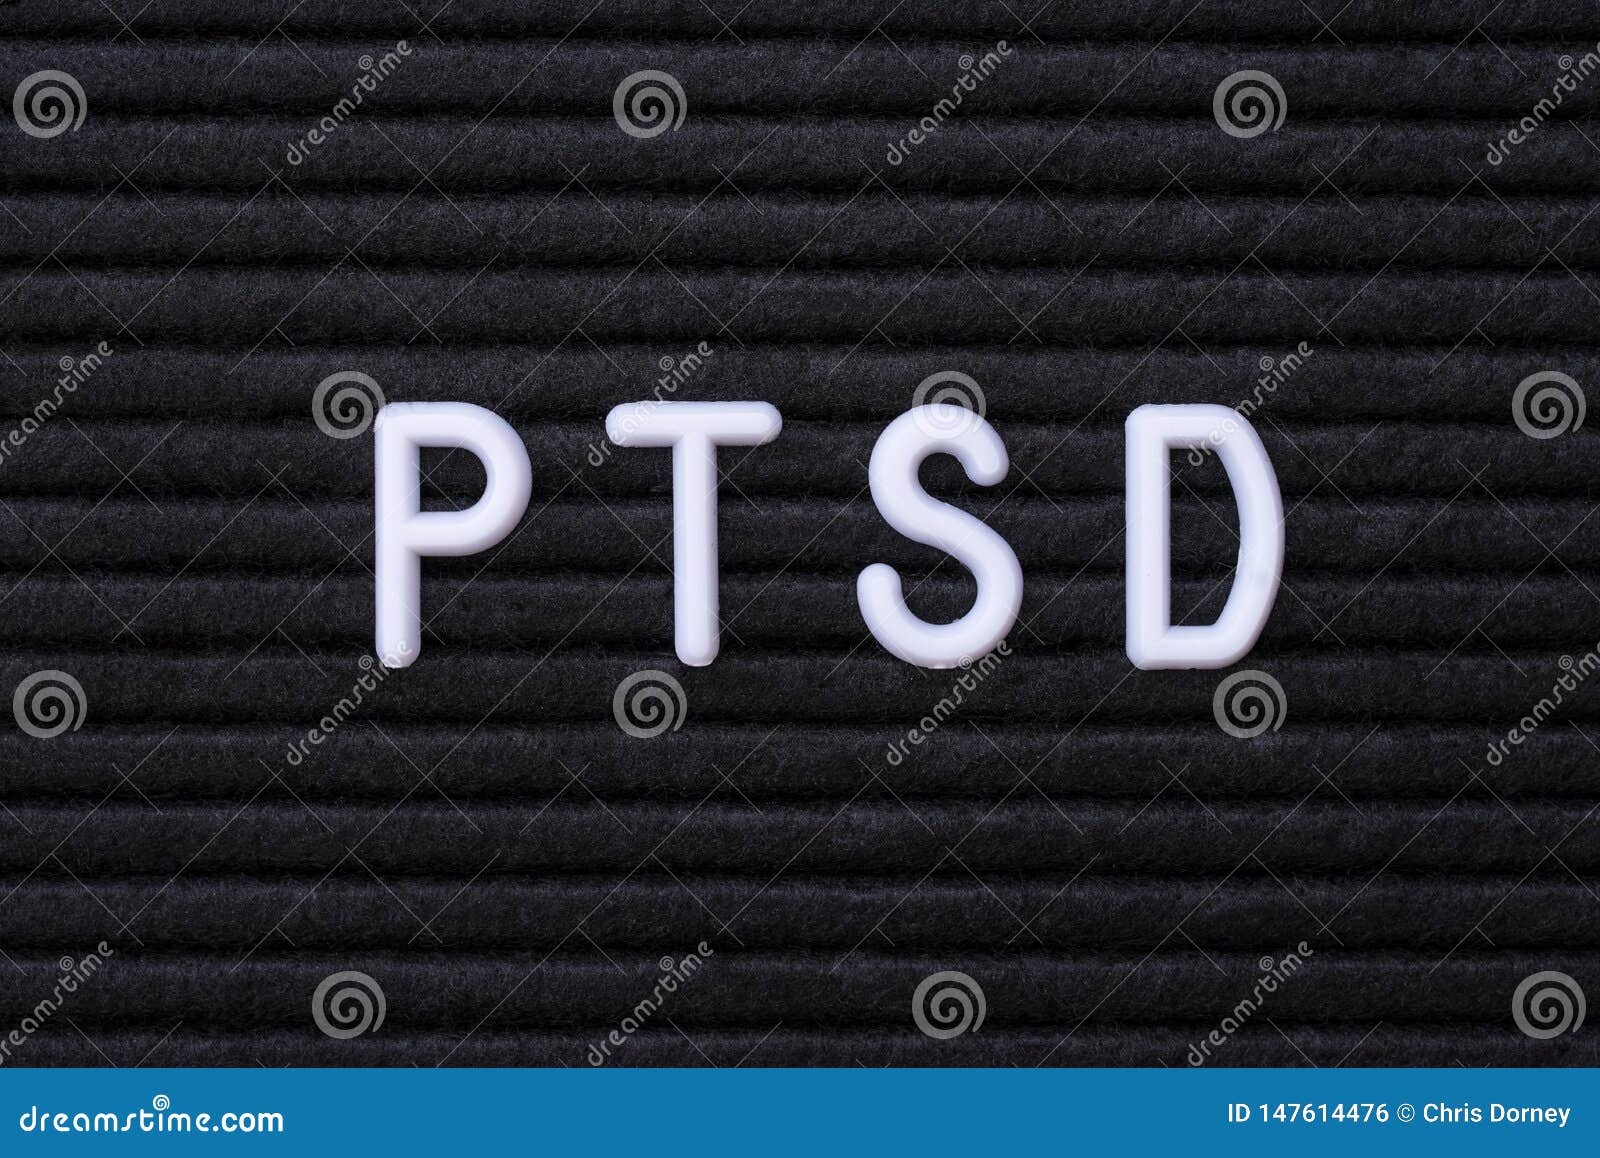 the-abbreviation-ptsd-stock-photo-image-of-sign-letters-147614476